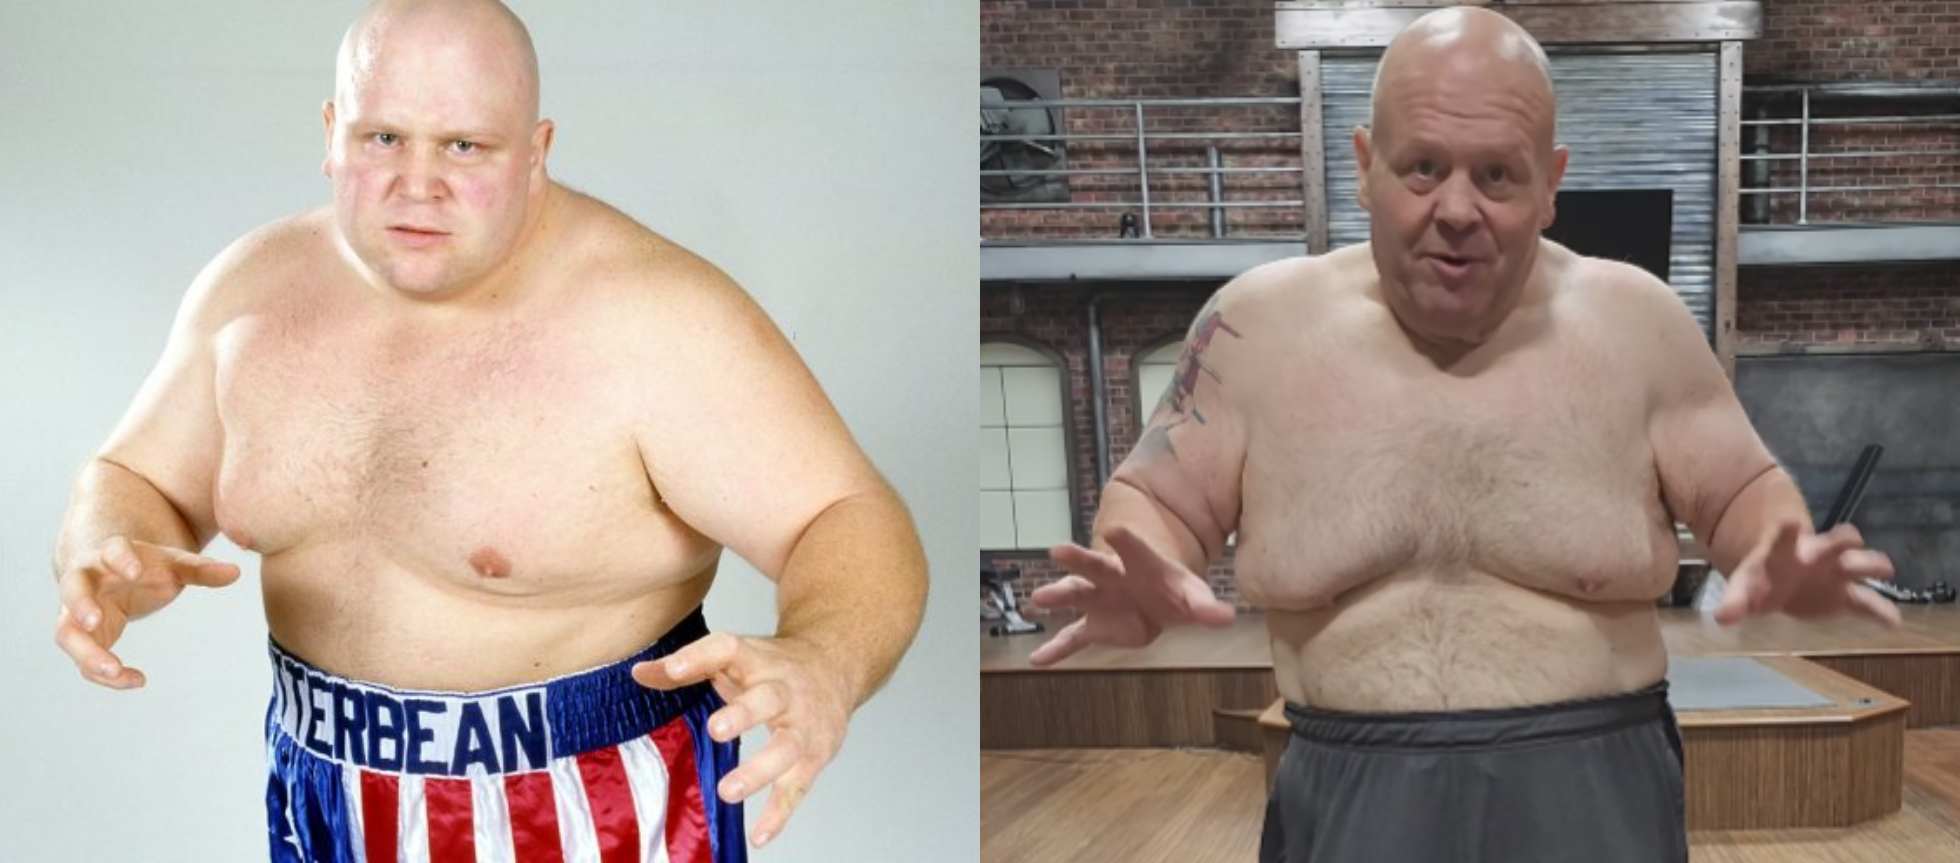 Boxing legend Butterbean Esch loses more than 200 pounds in dramatic ...